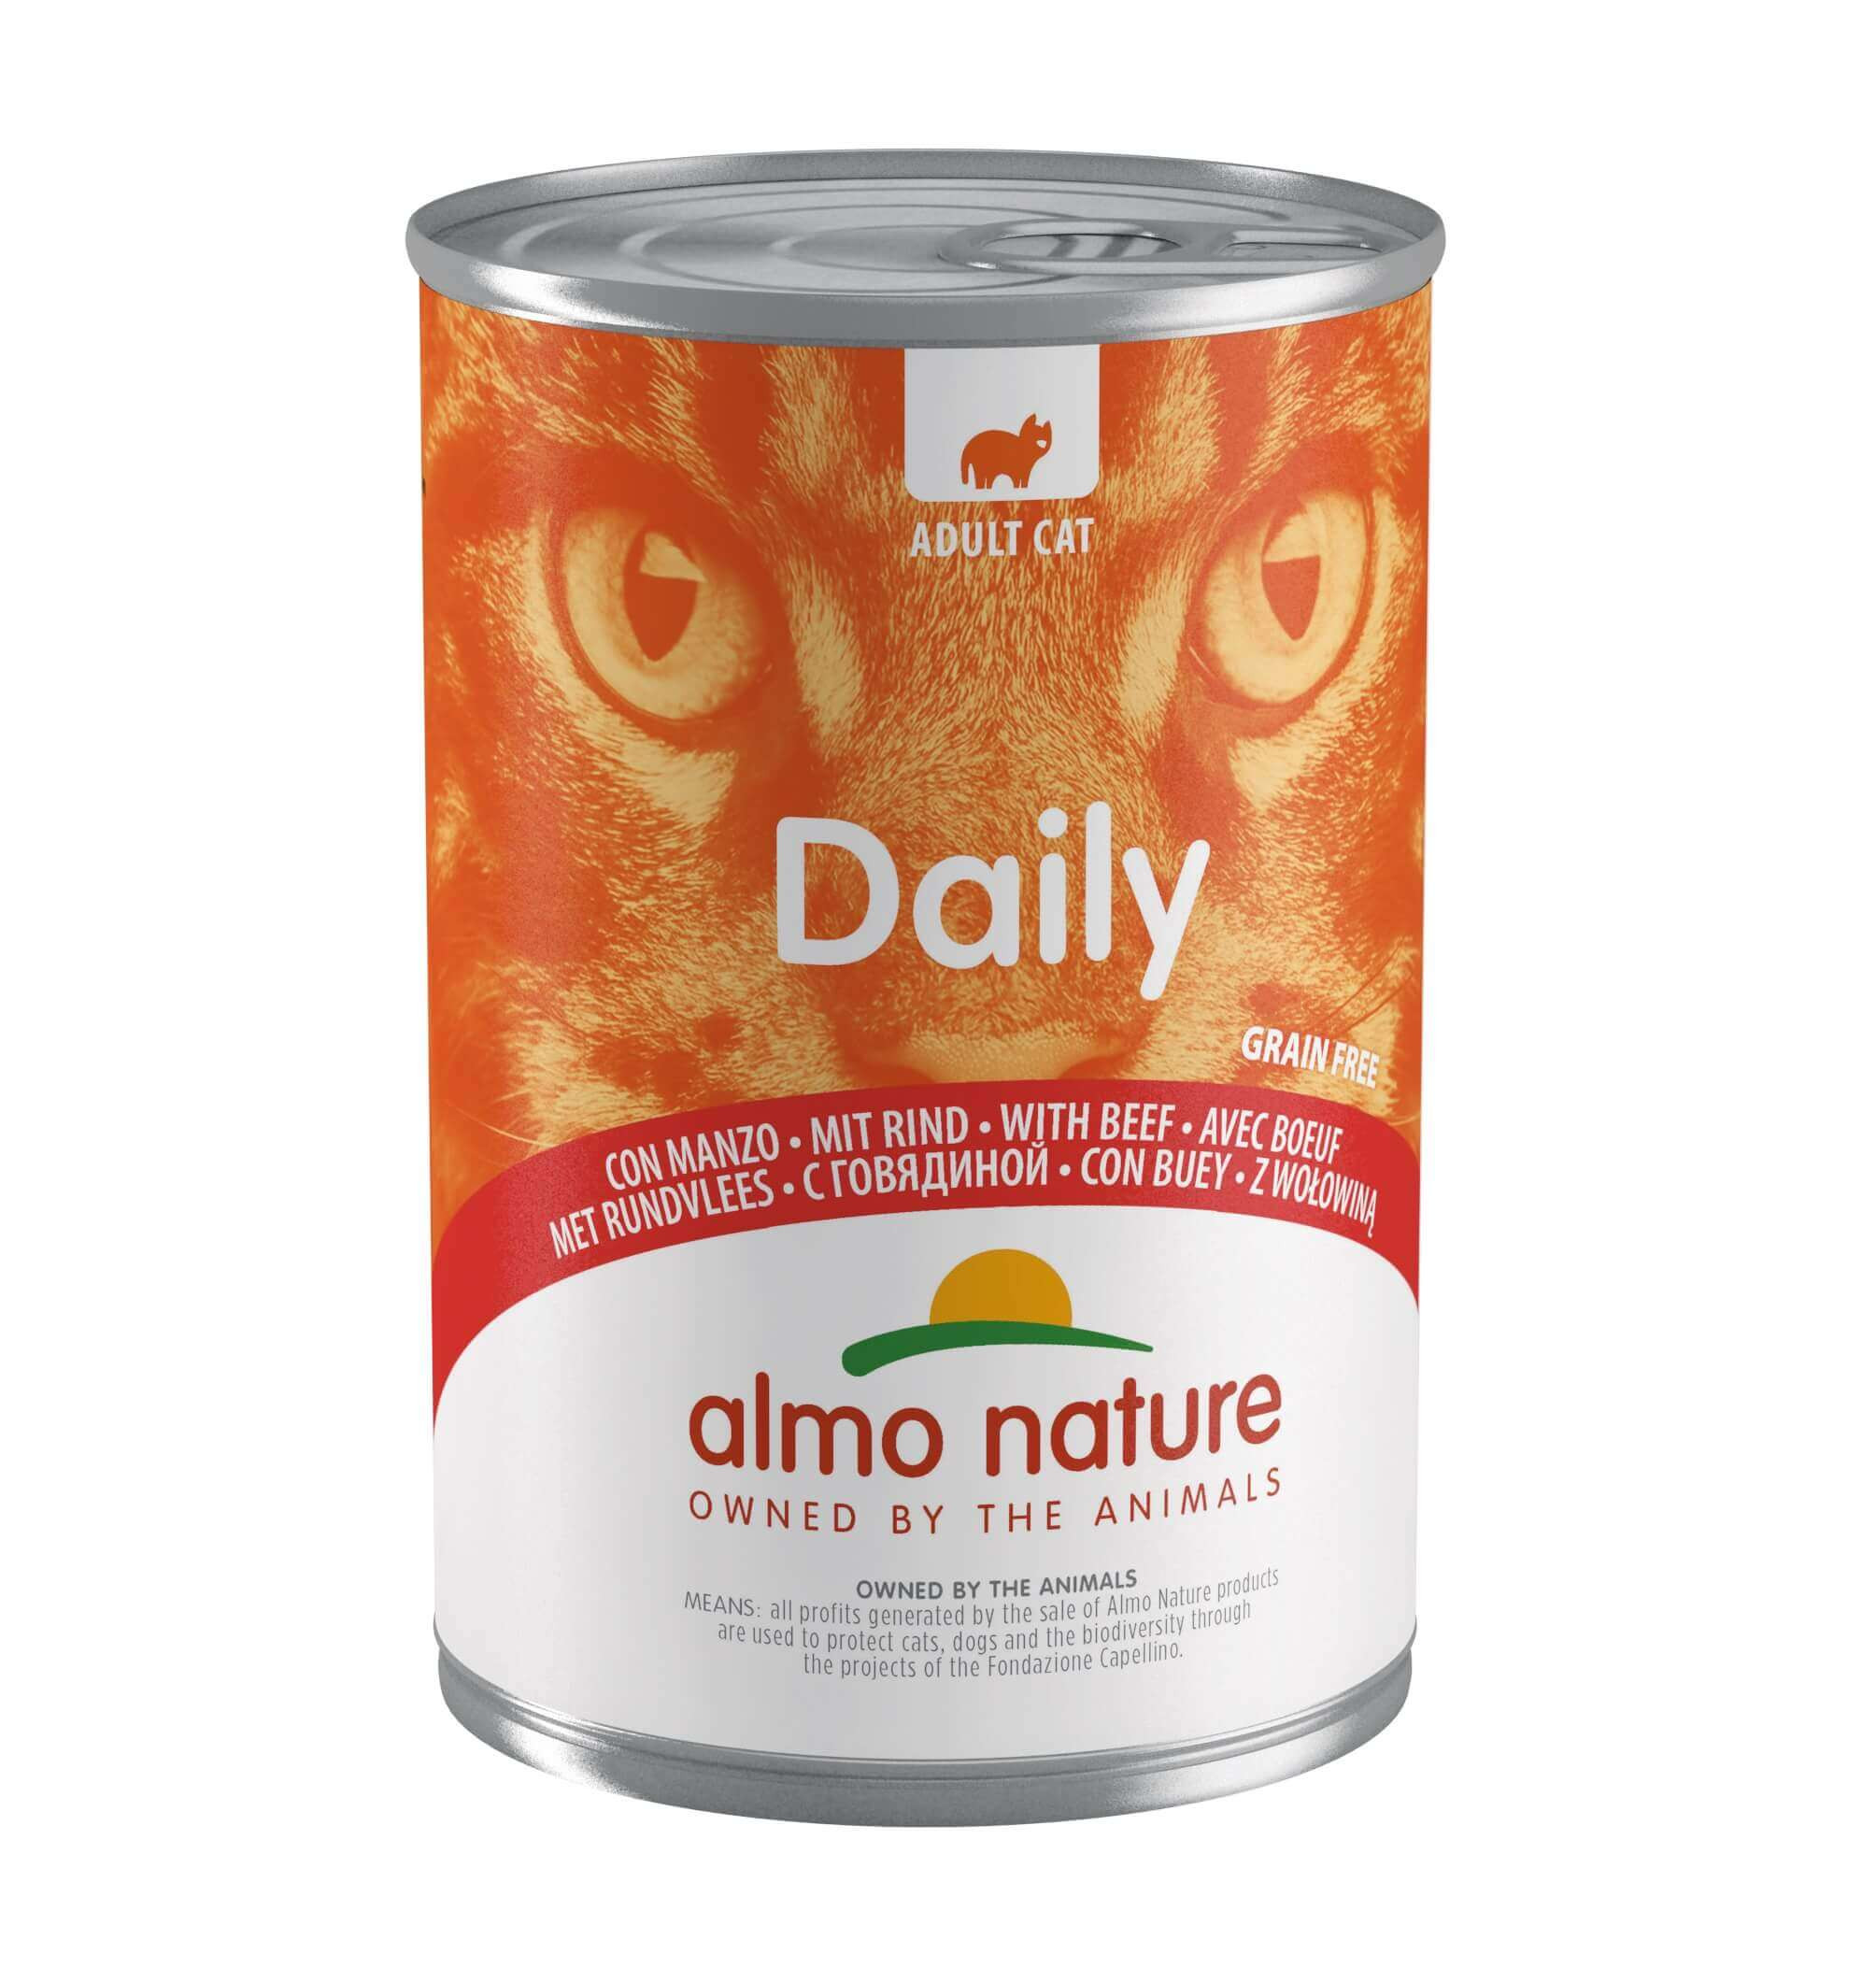 Almo Nature Daily boeuf pour chat (400 g)